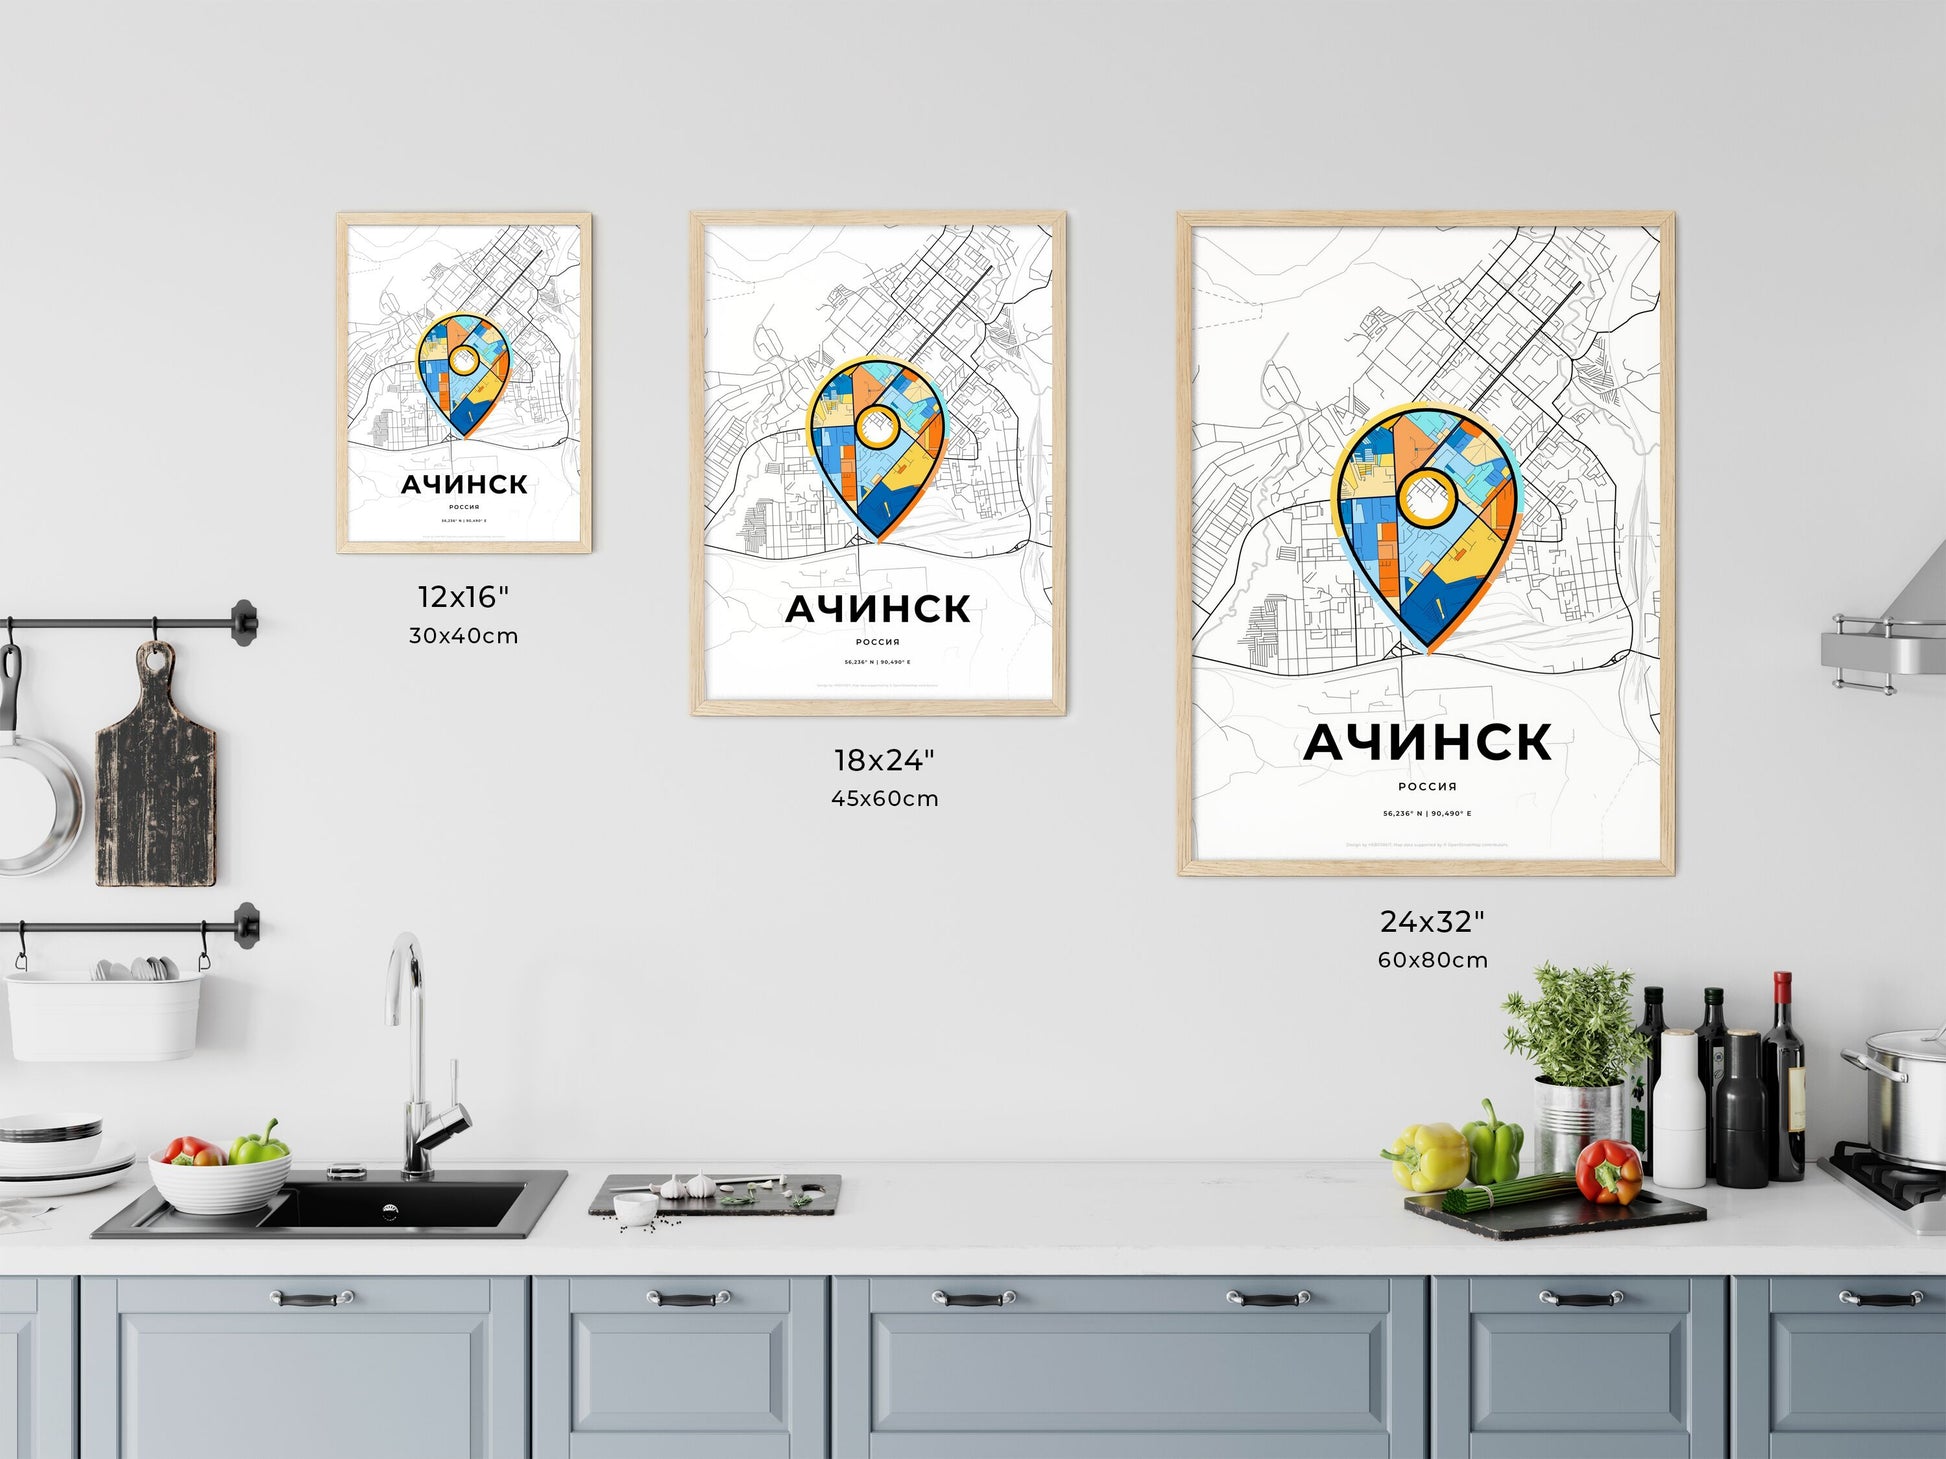 ACHINSK RUSSIA minimal art map with a colorful icon. Where it all began, Couple map gift.